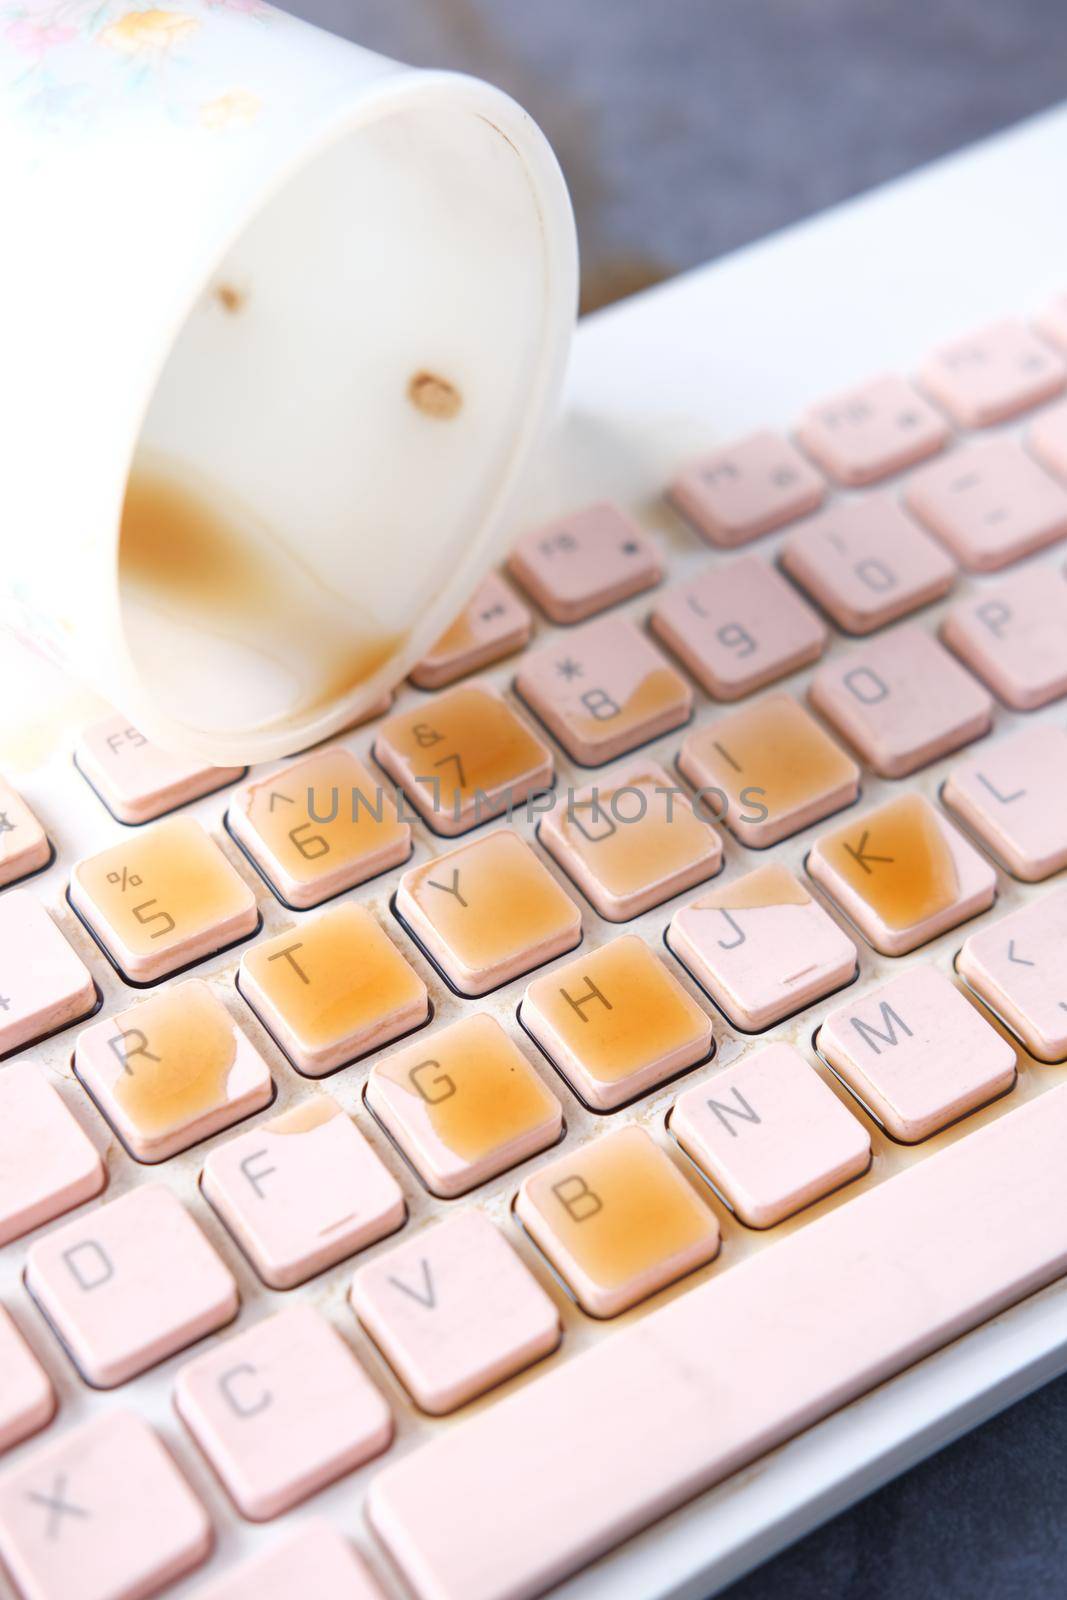 coffee spilling on laptop keyboard. close up .